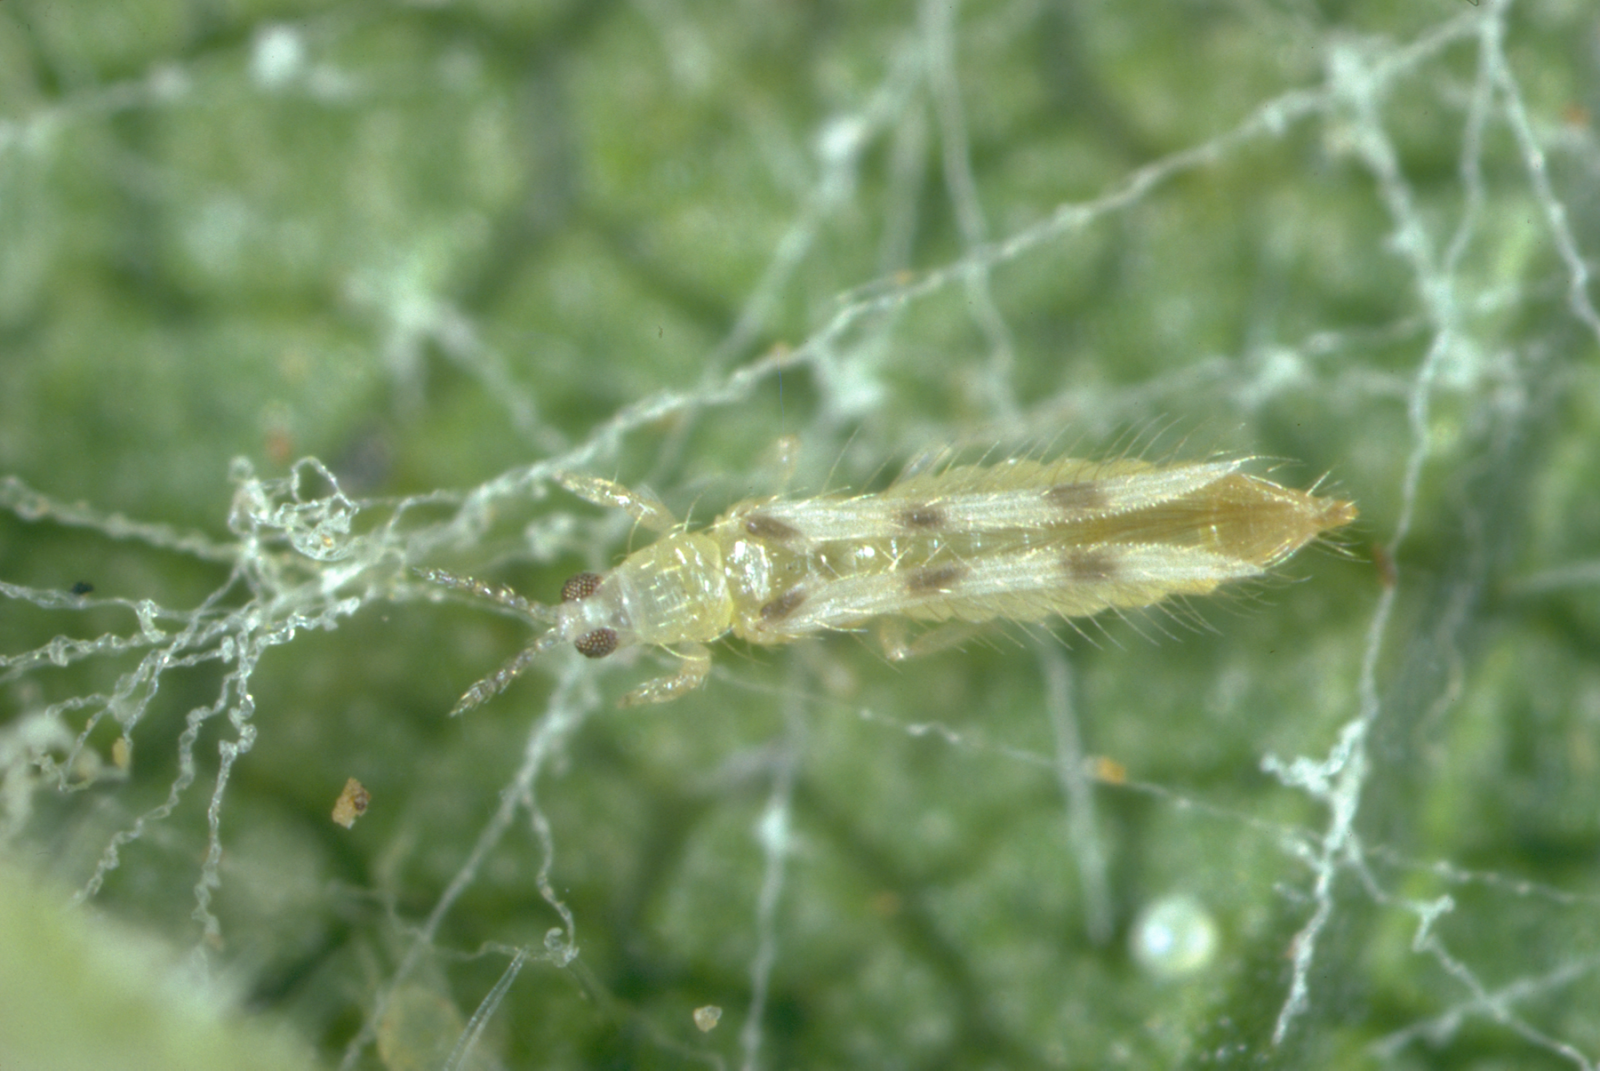 Six-spotted thrips: green insect with six spots on a green background